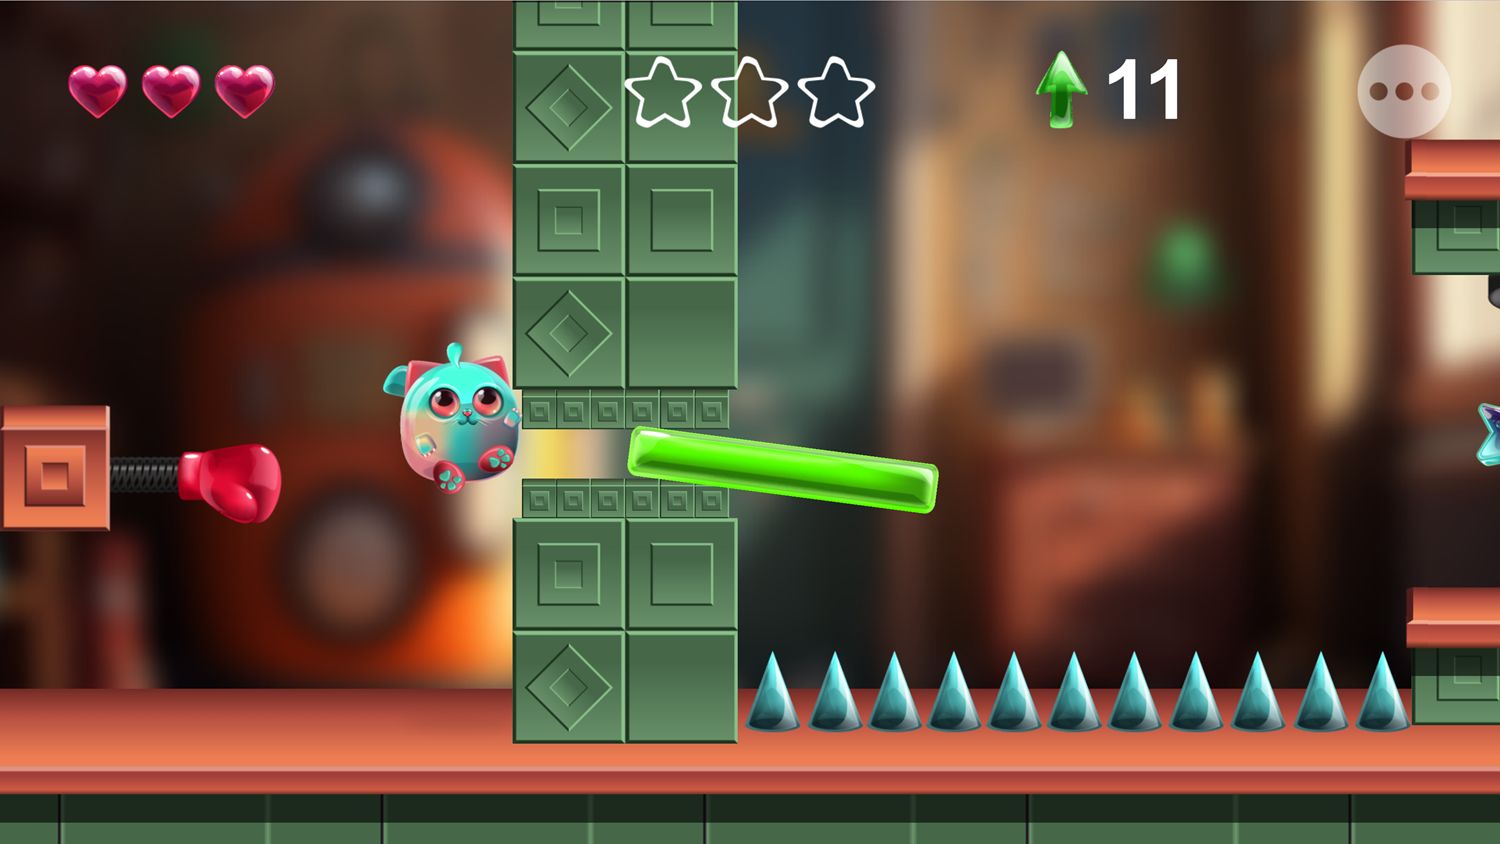 Fluffy Jelly Cat Game Level With a Boxing Glove Screenshot.